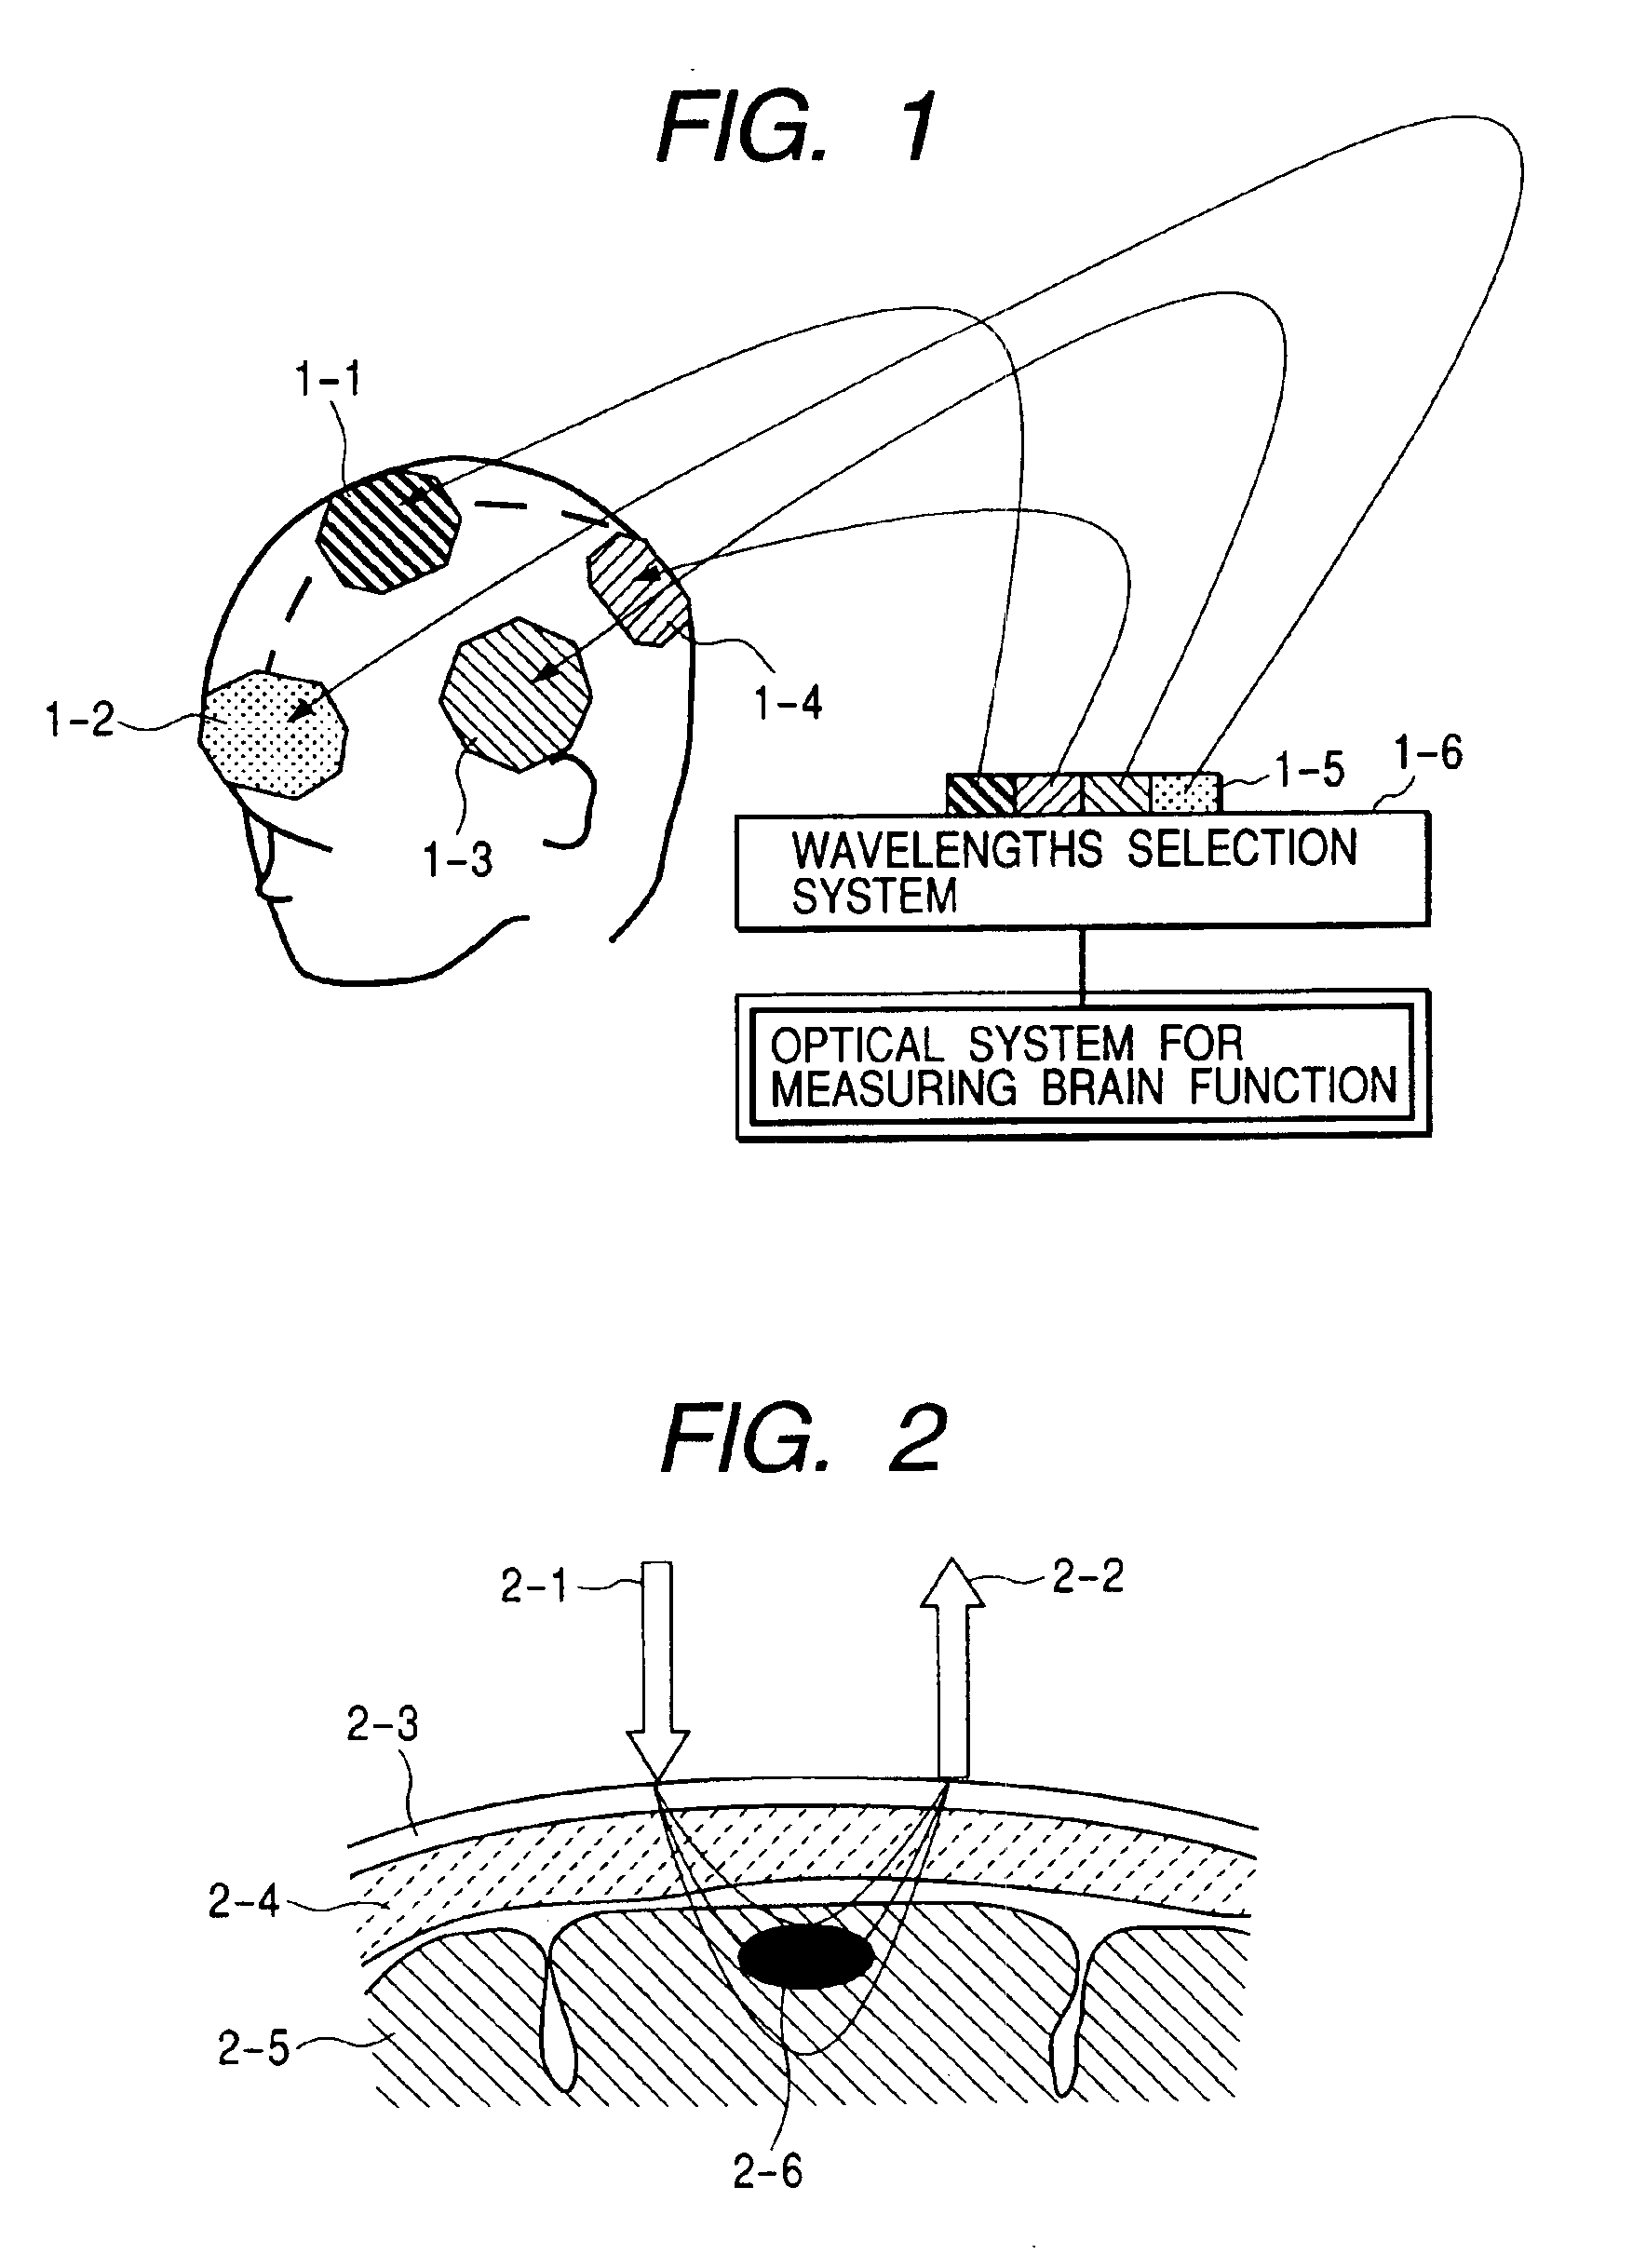 Optical system for measuring metabolism in a body